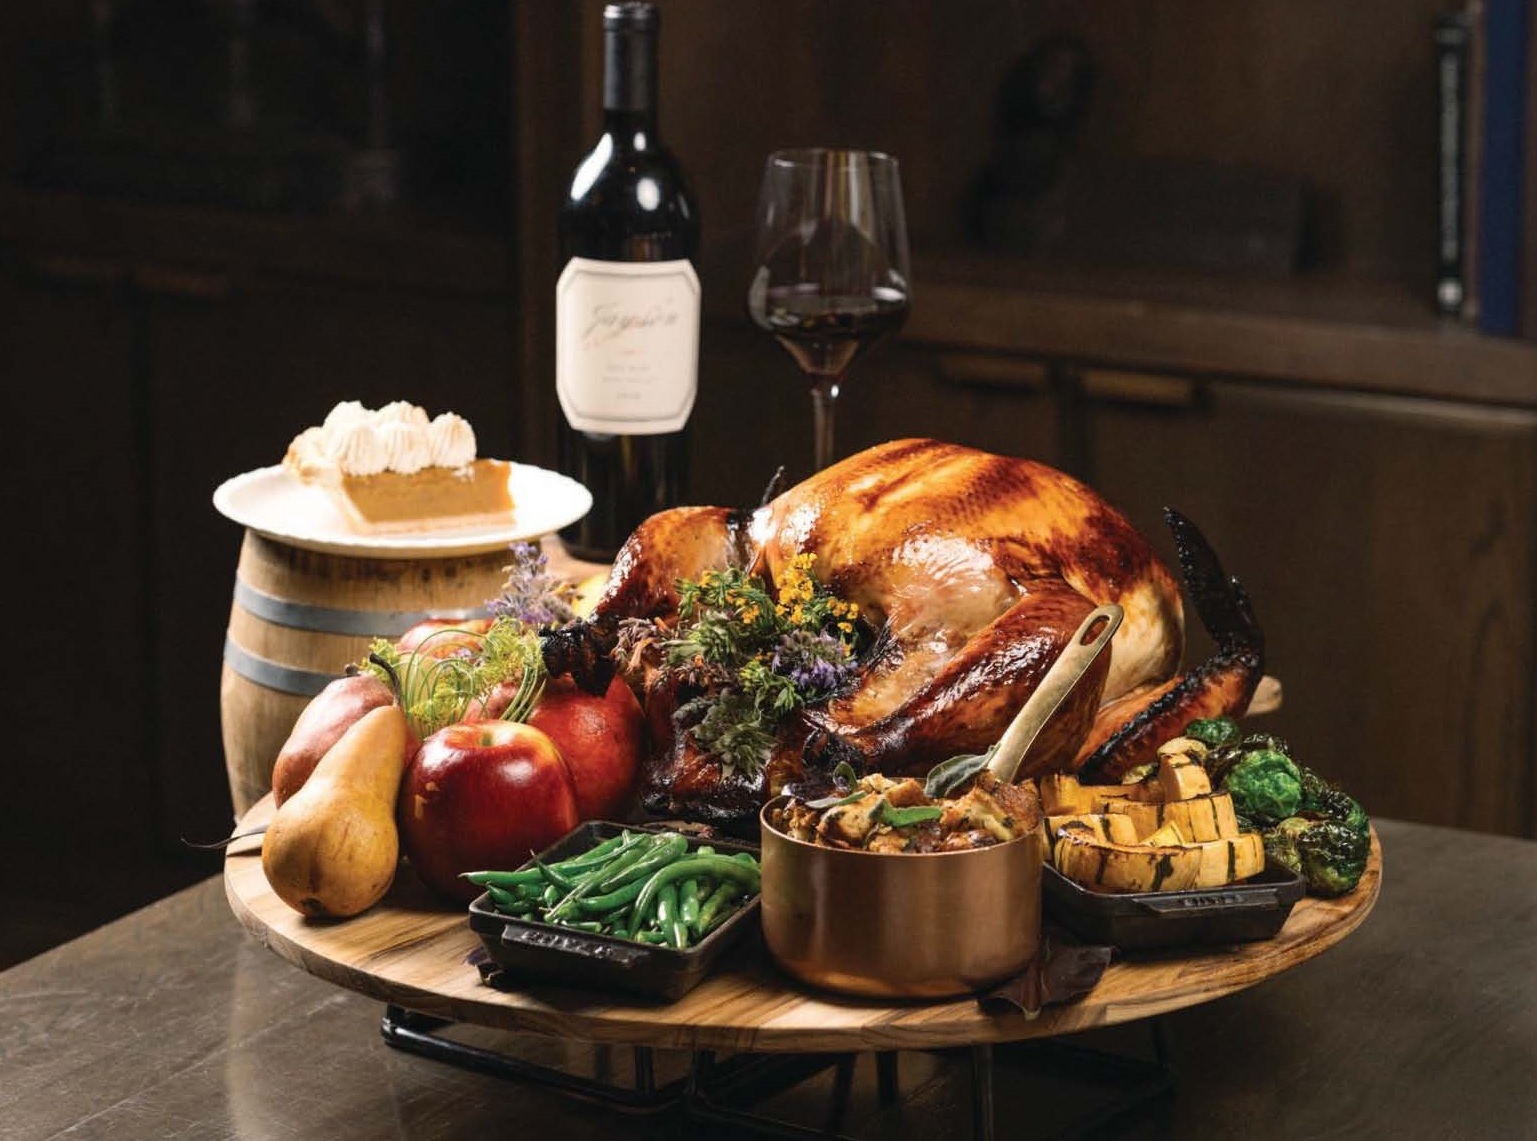 Bank & Bourbon’s Thanksgiving feast features an optional wine pairing with sips like a Chateau Loupiac- Gaudiet Sauternes. PHOTO COURTESY OF BRAND